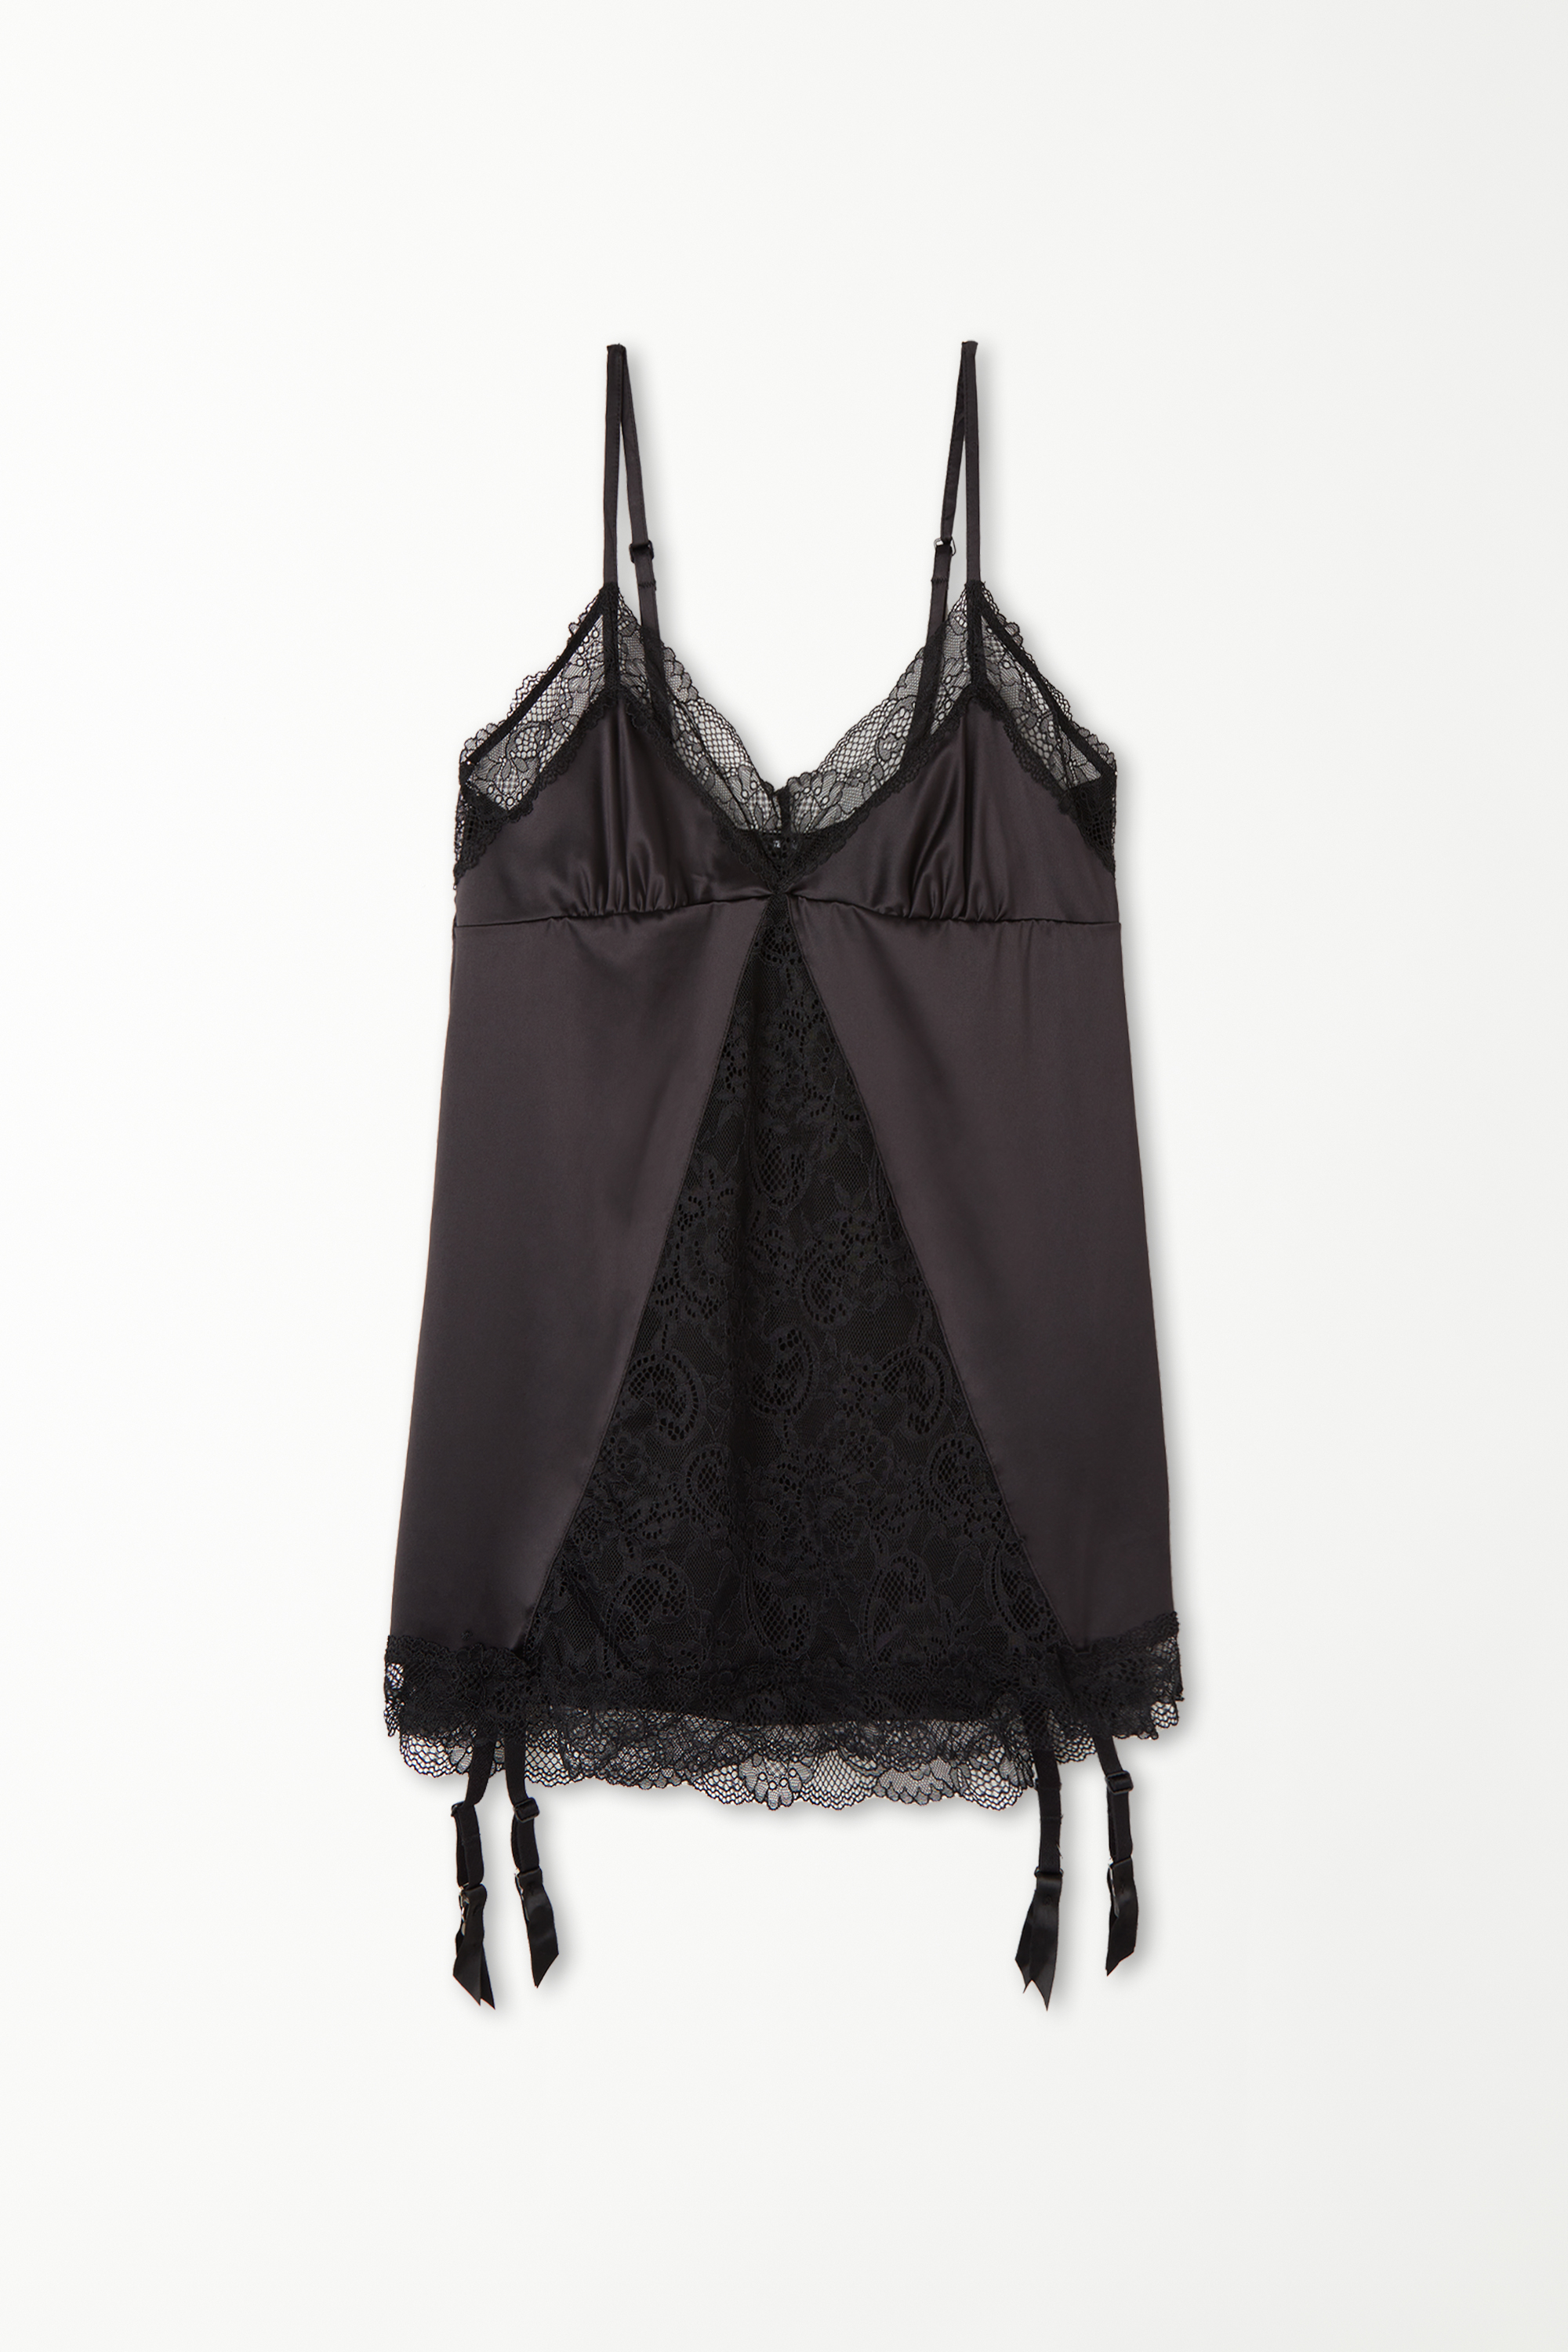 SLIP NARROW SHOULDER STRAPS Triang.timeless LACE